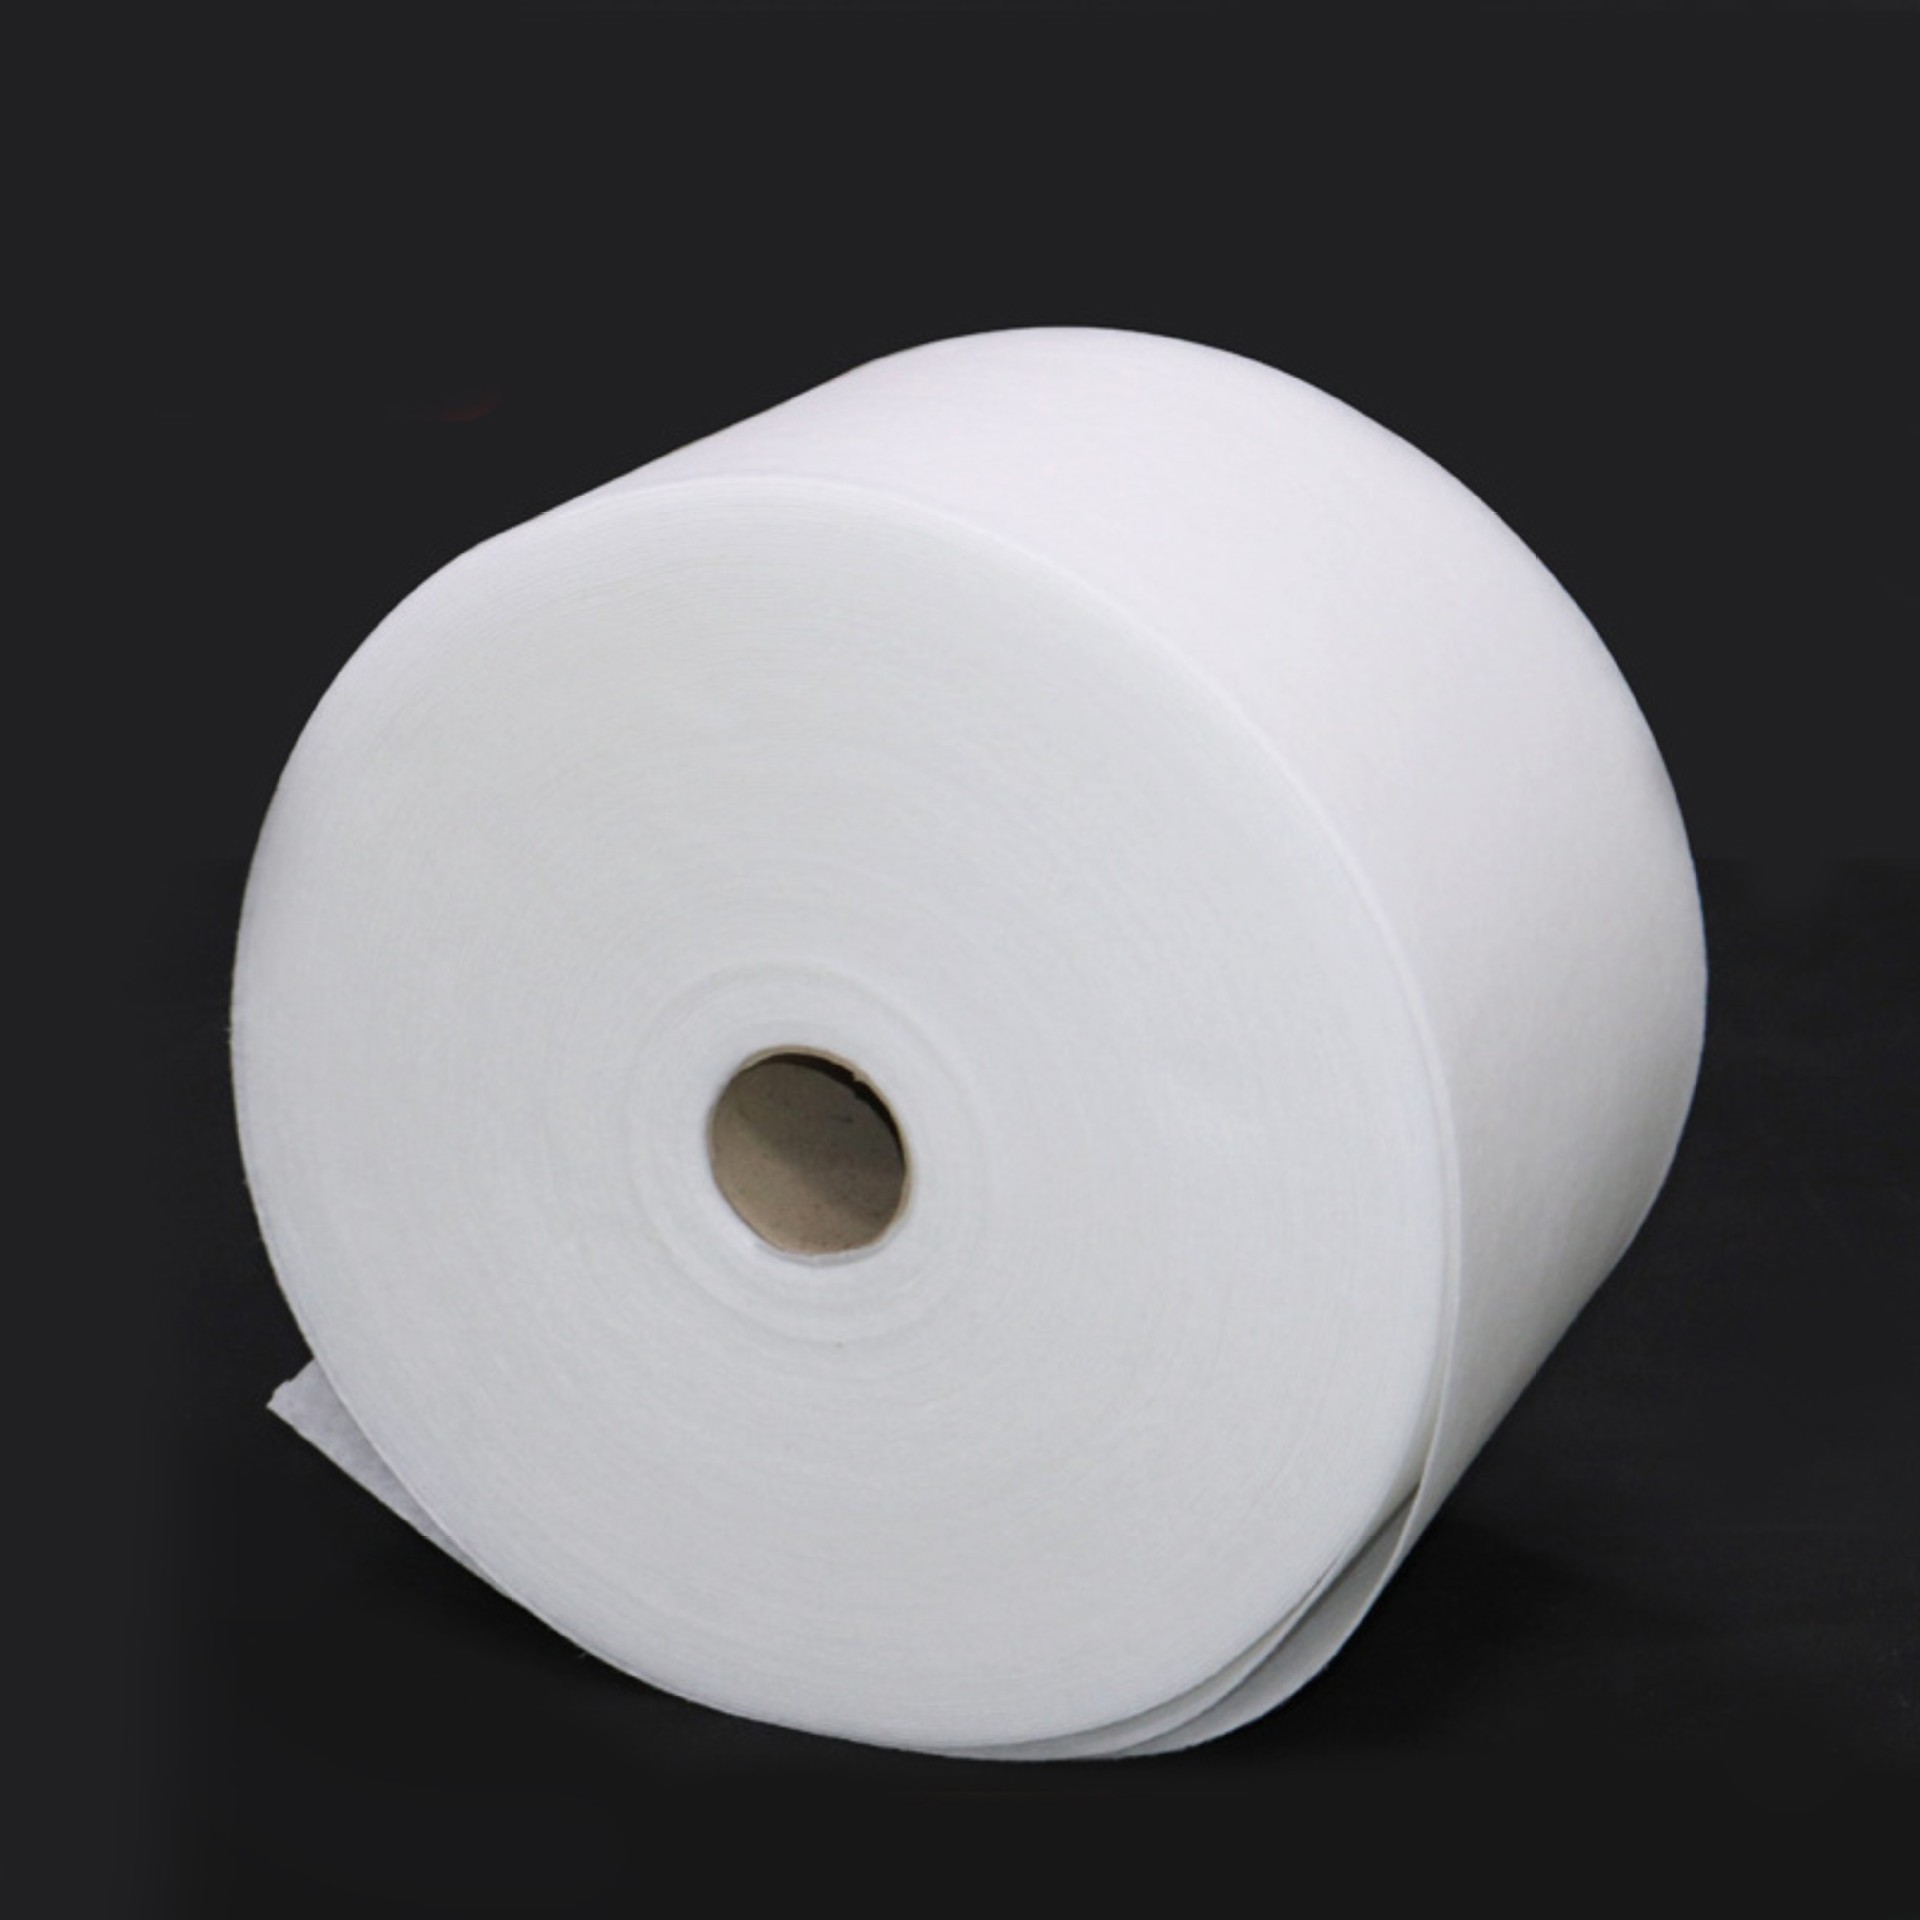 white hot air cotton for mask supply fast delivery mask material Manufacturers, white hot air cotton for mask supply fast delivery mask material Factory, Supply white hot air cotton for mask supply fast delivery mask material